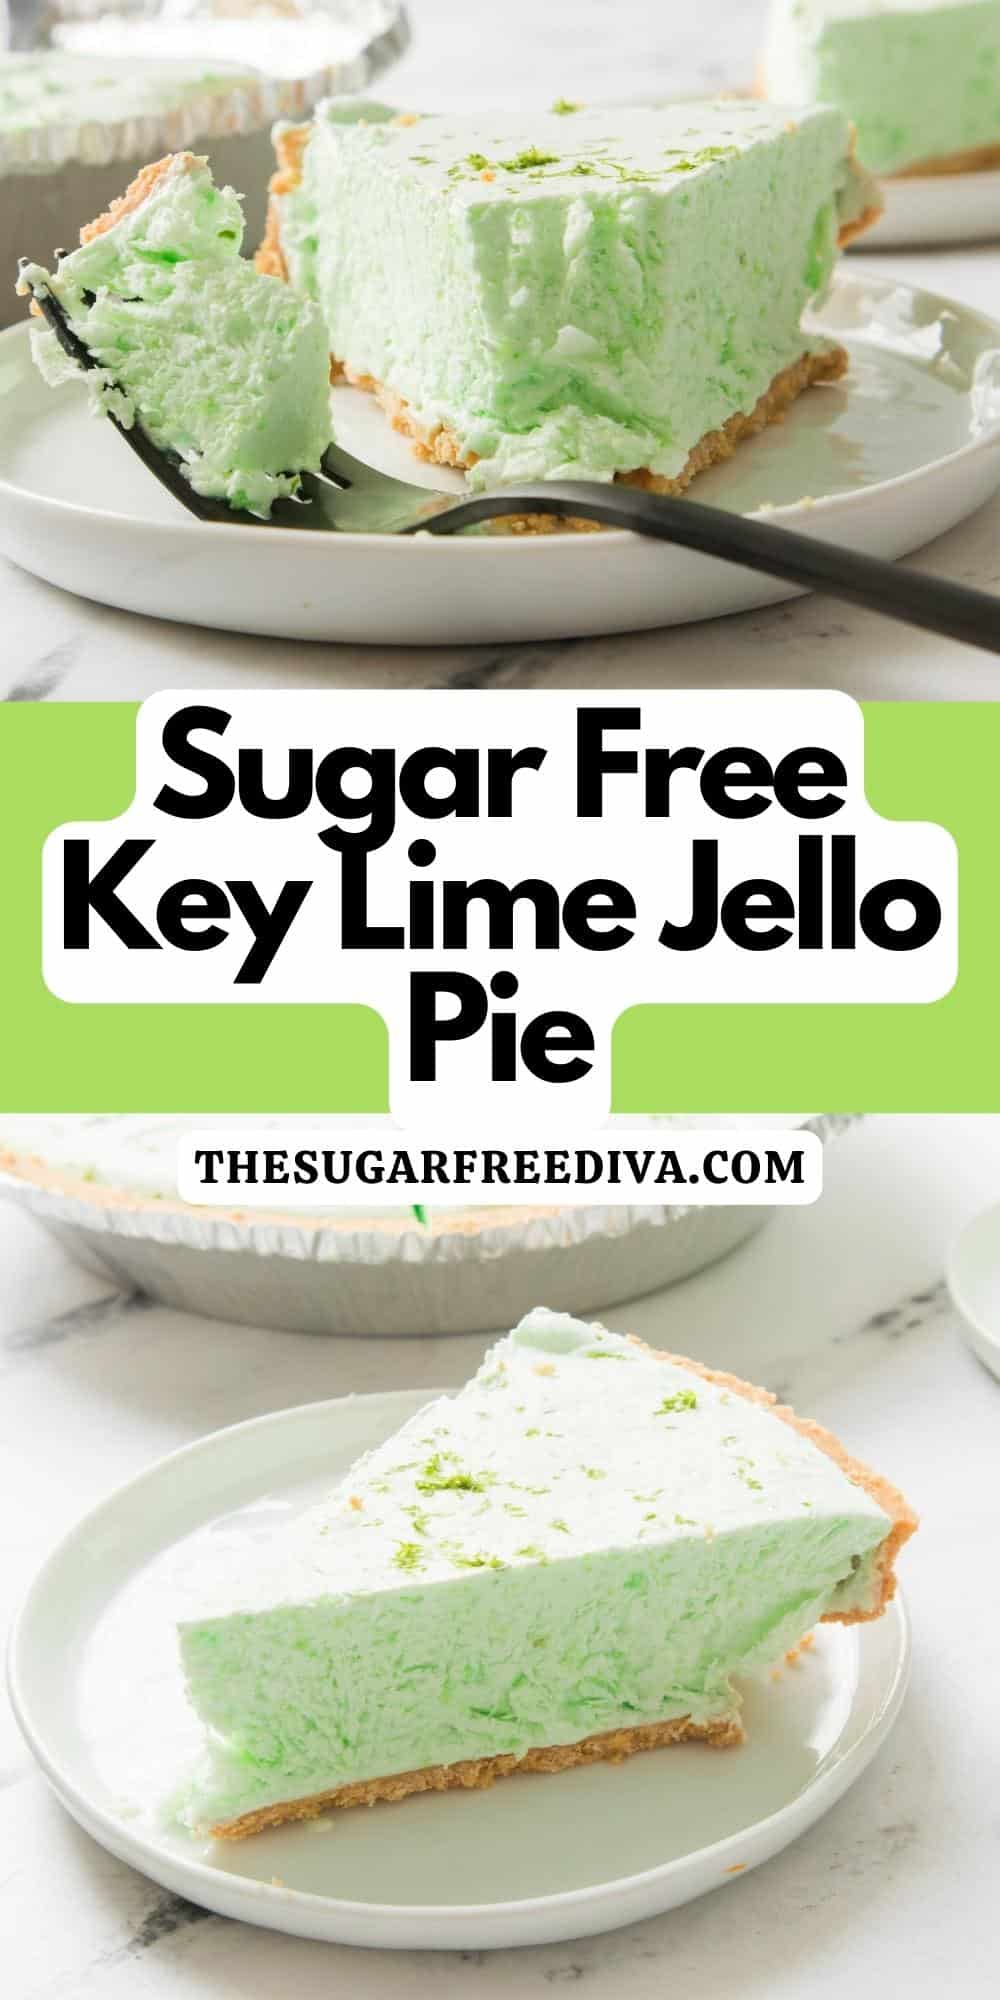 Sugar Free Key Lime Jello Pie, a simple no bake dessert recipe made with gelatin and that has no added sugar.